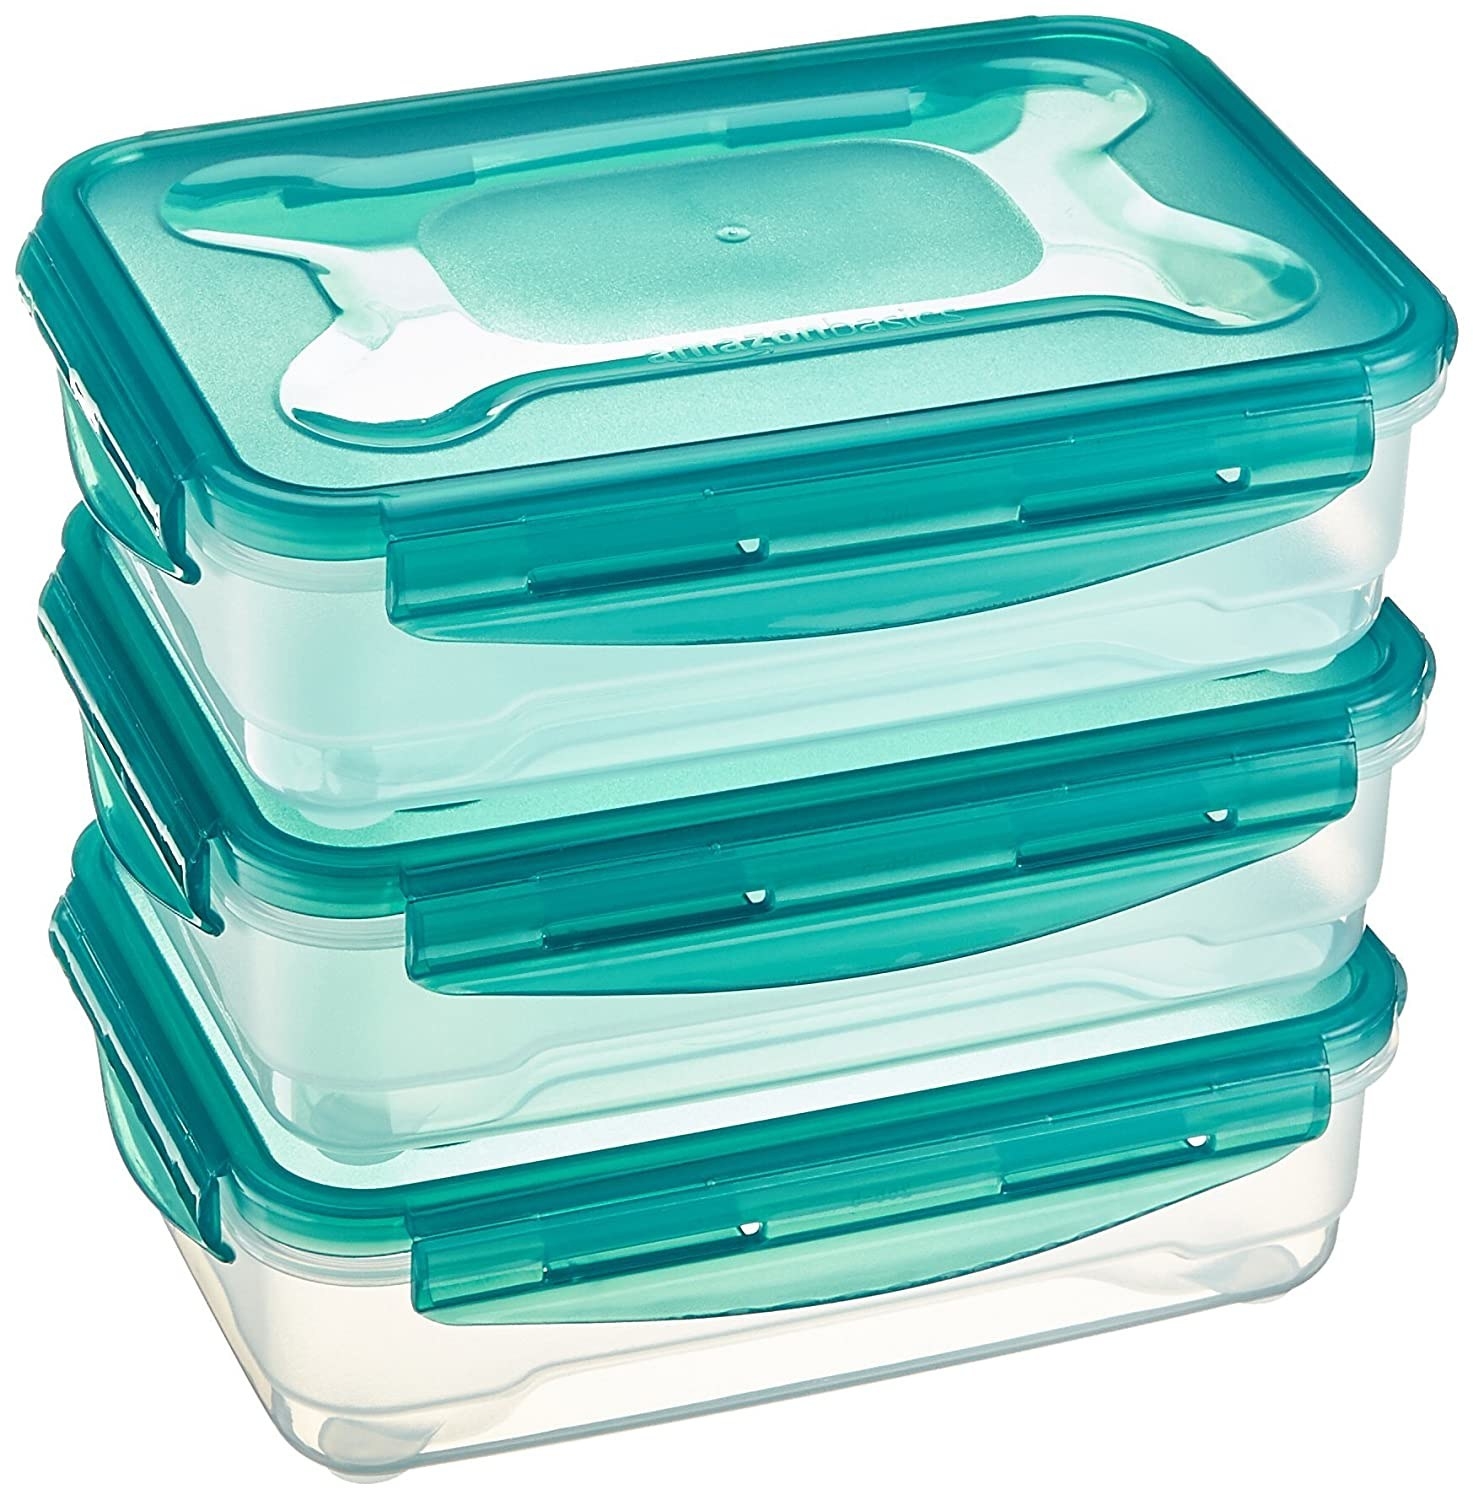 Storage containers with blue lids